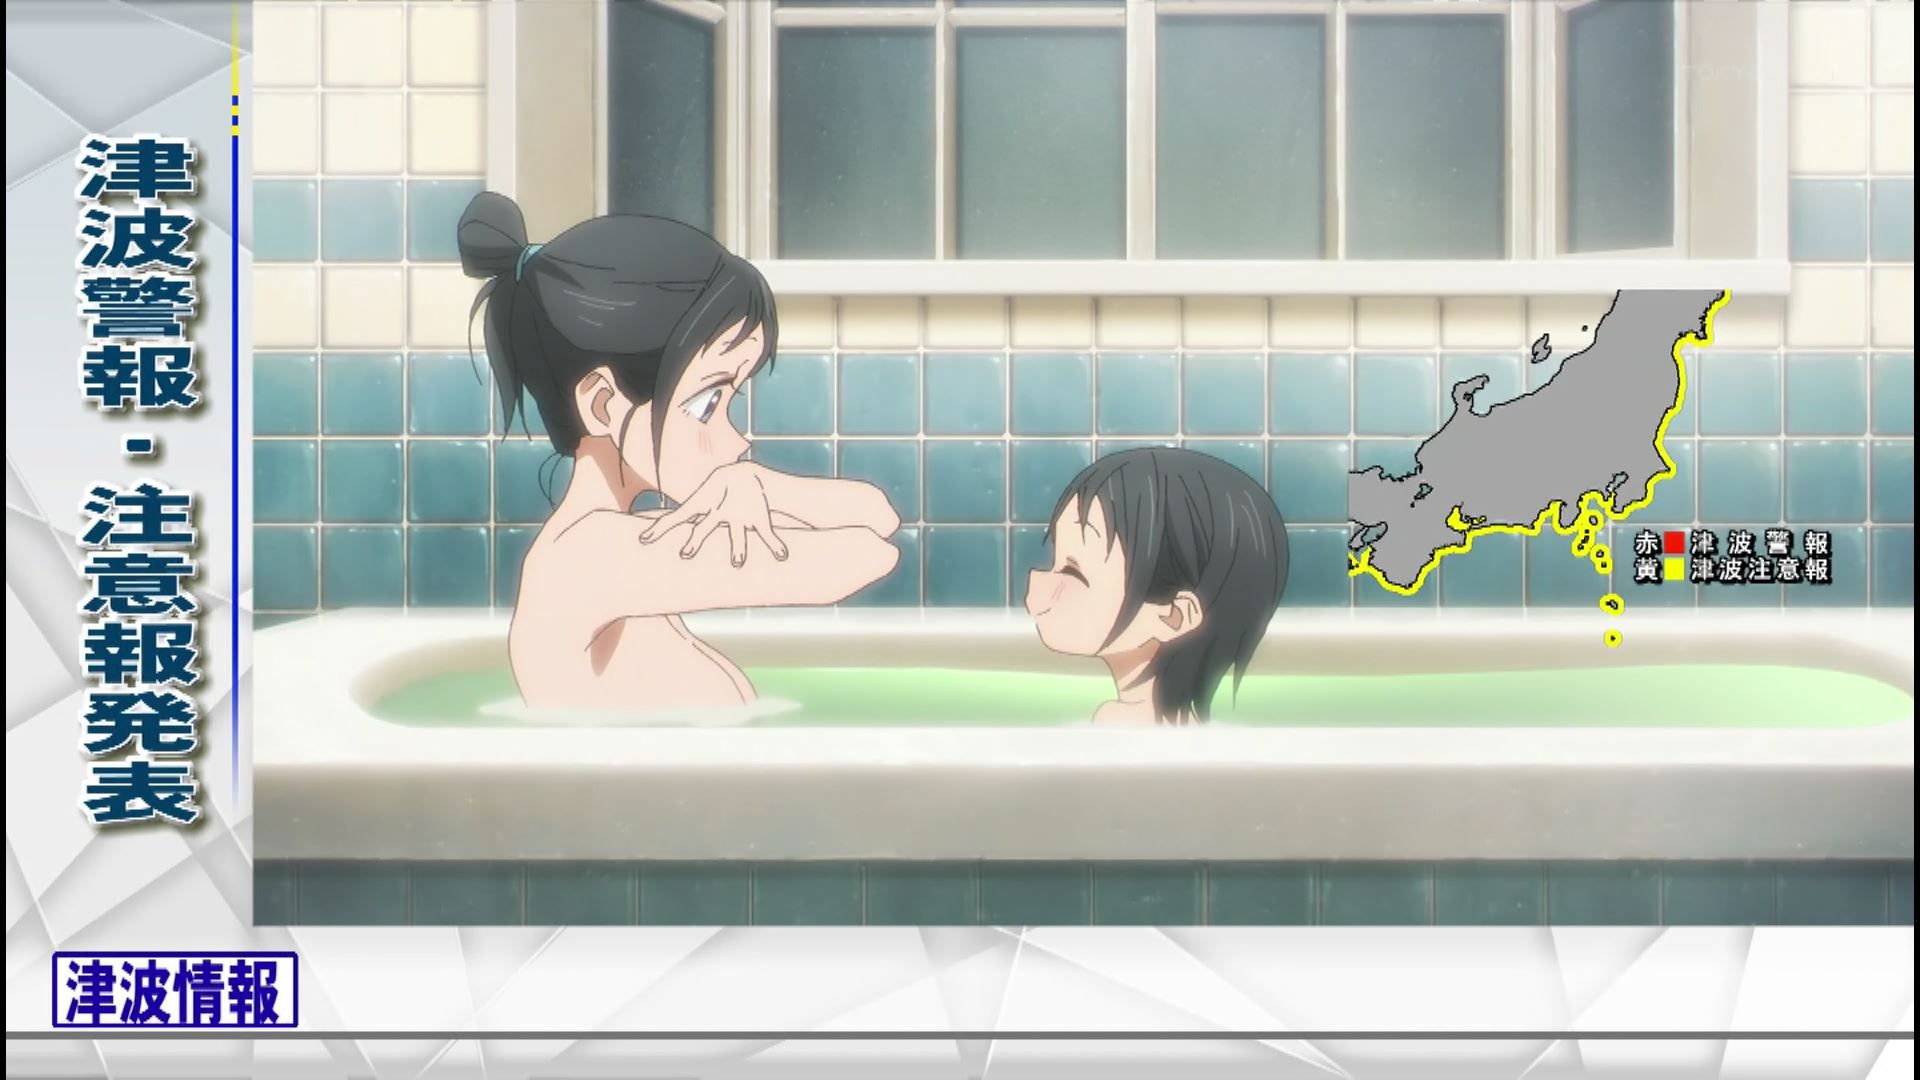 In the anime "Tomorrow-chan's Sailor Suit" episode 2, the girl's erotic bathing scene and the punchy scene 23